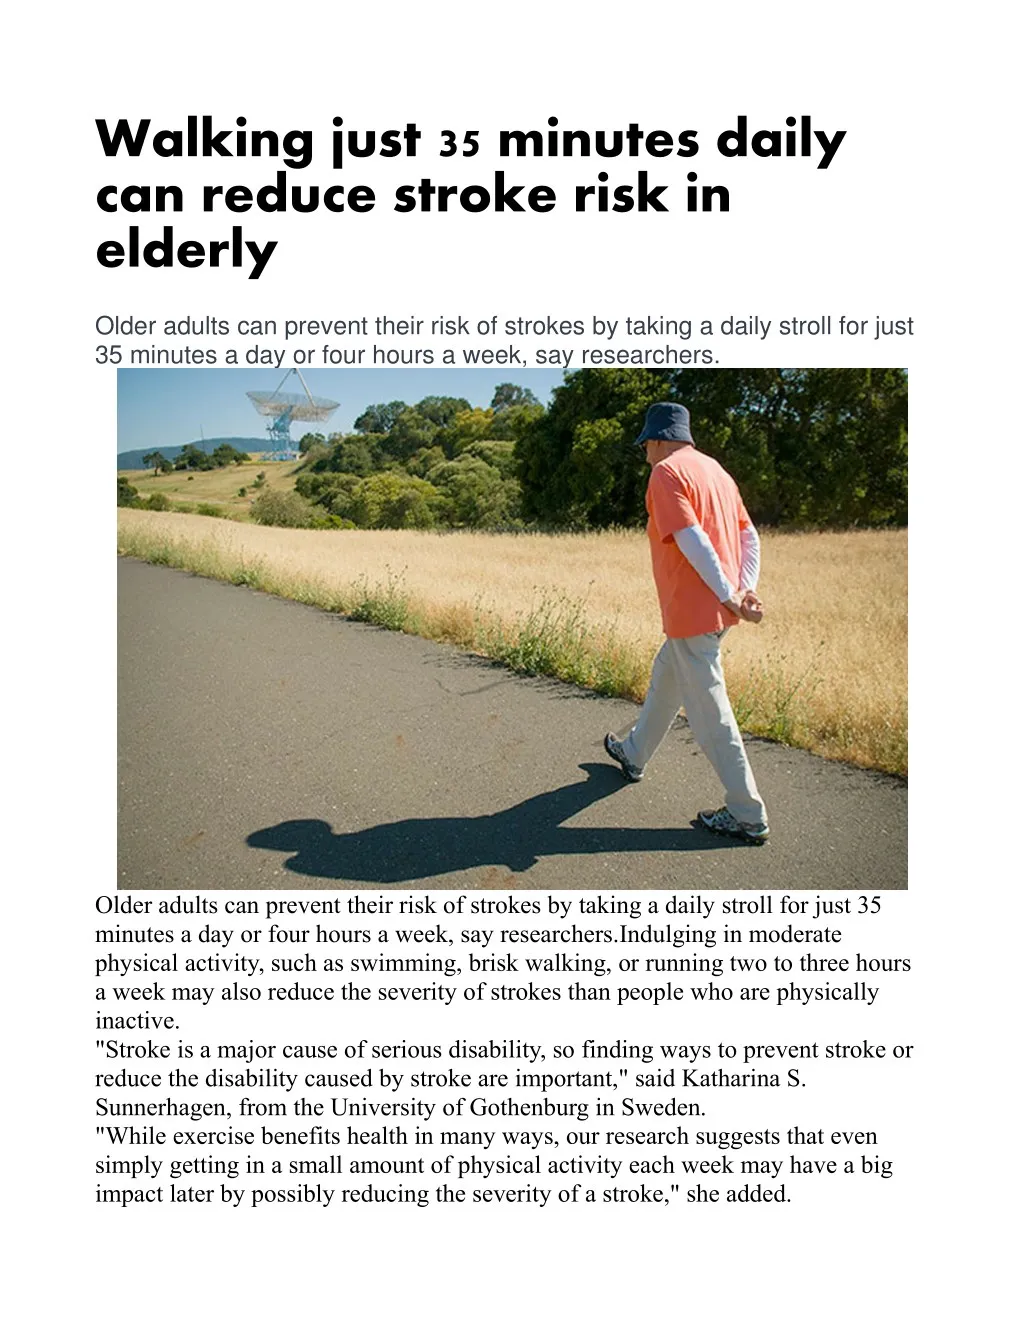 walking just 35 minutes daily can reduce stroke